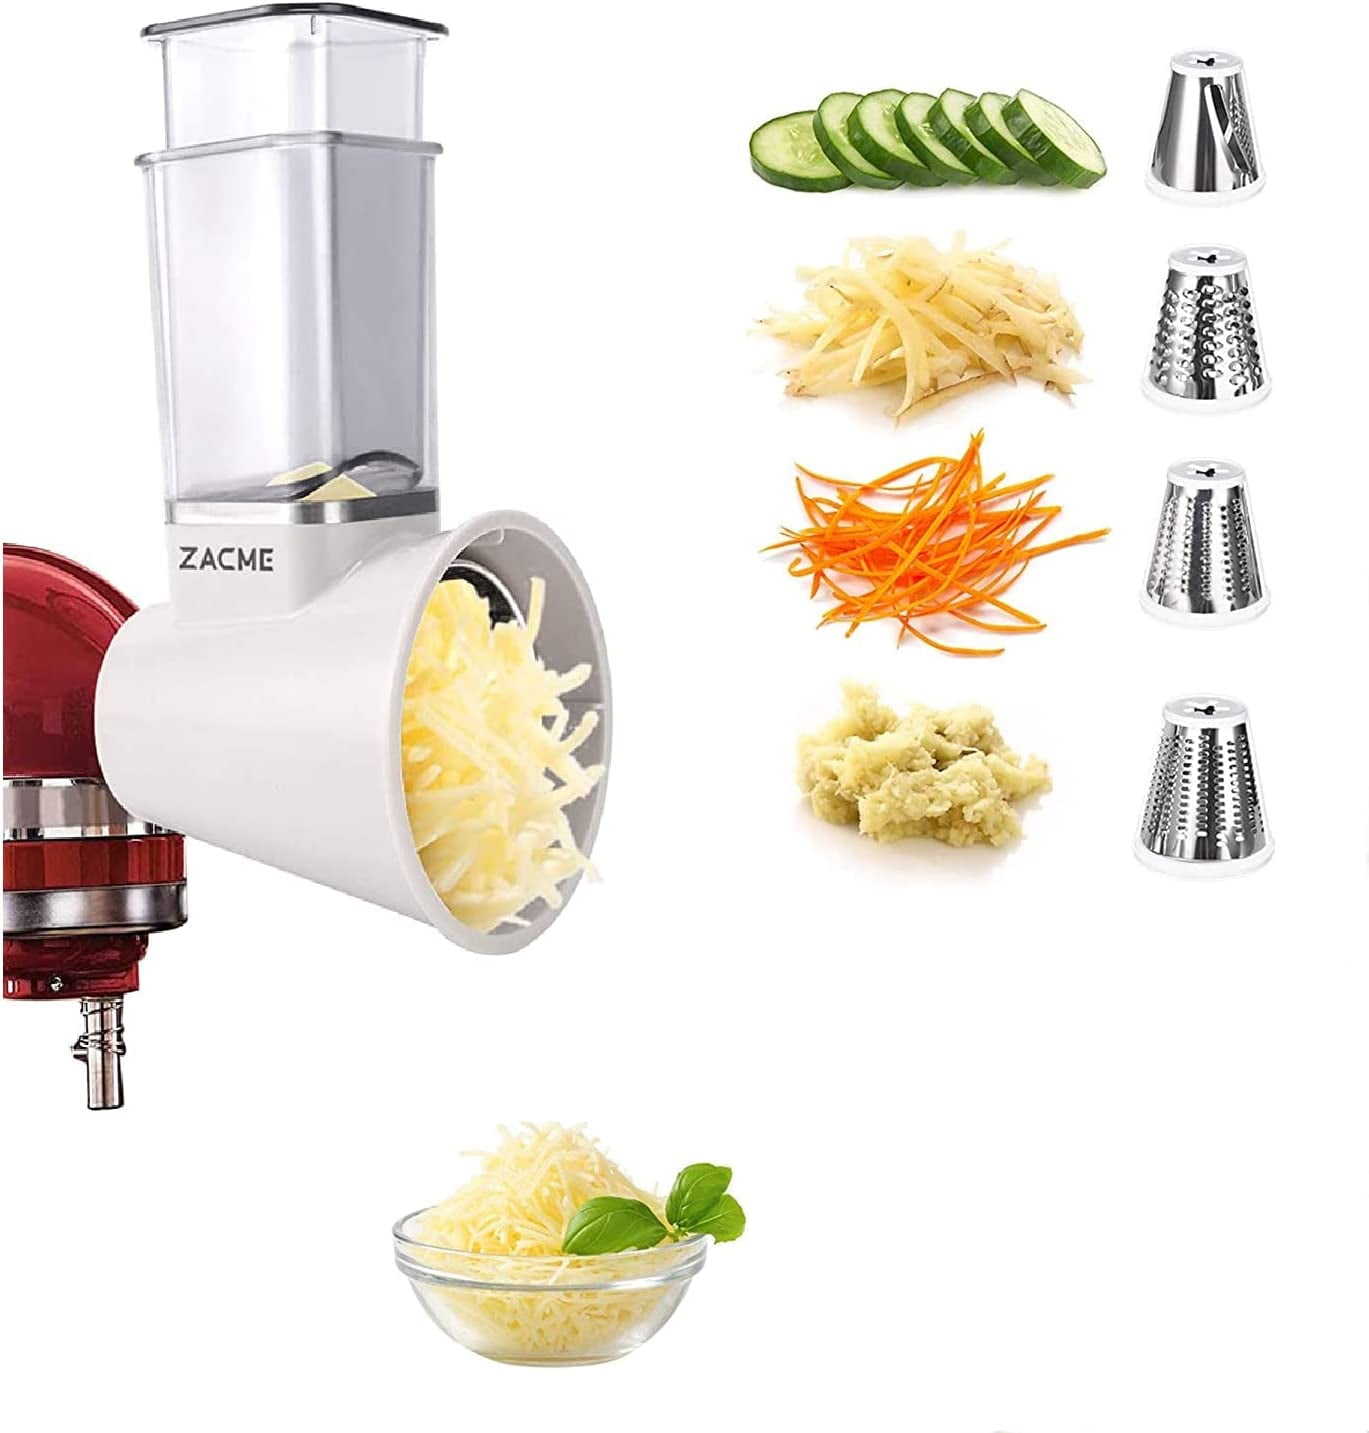 Leixe Slicer/Shredder Attachment for KitchenAid Stand Mixers, Cheese Grater  Attachment Vegetable Slicer Attachment for KitchenAid, Salad Maker